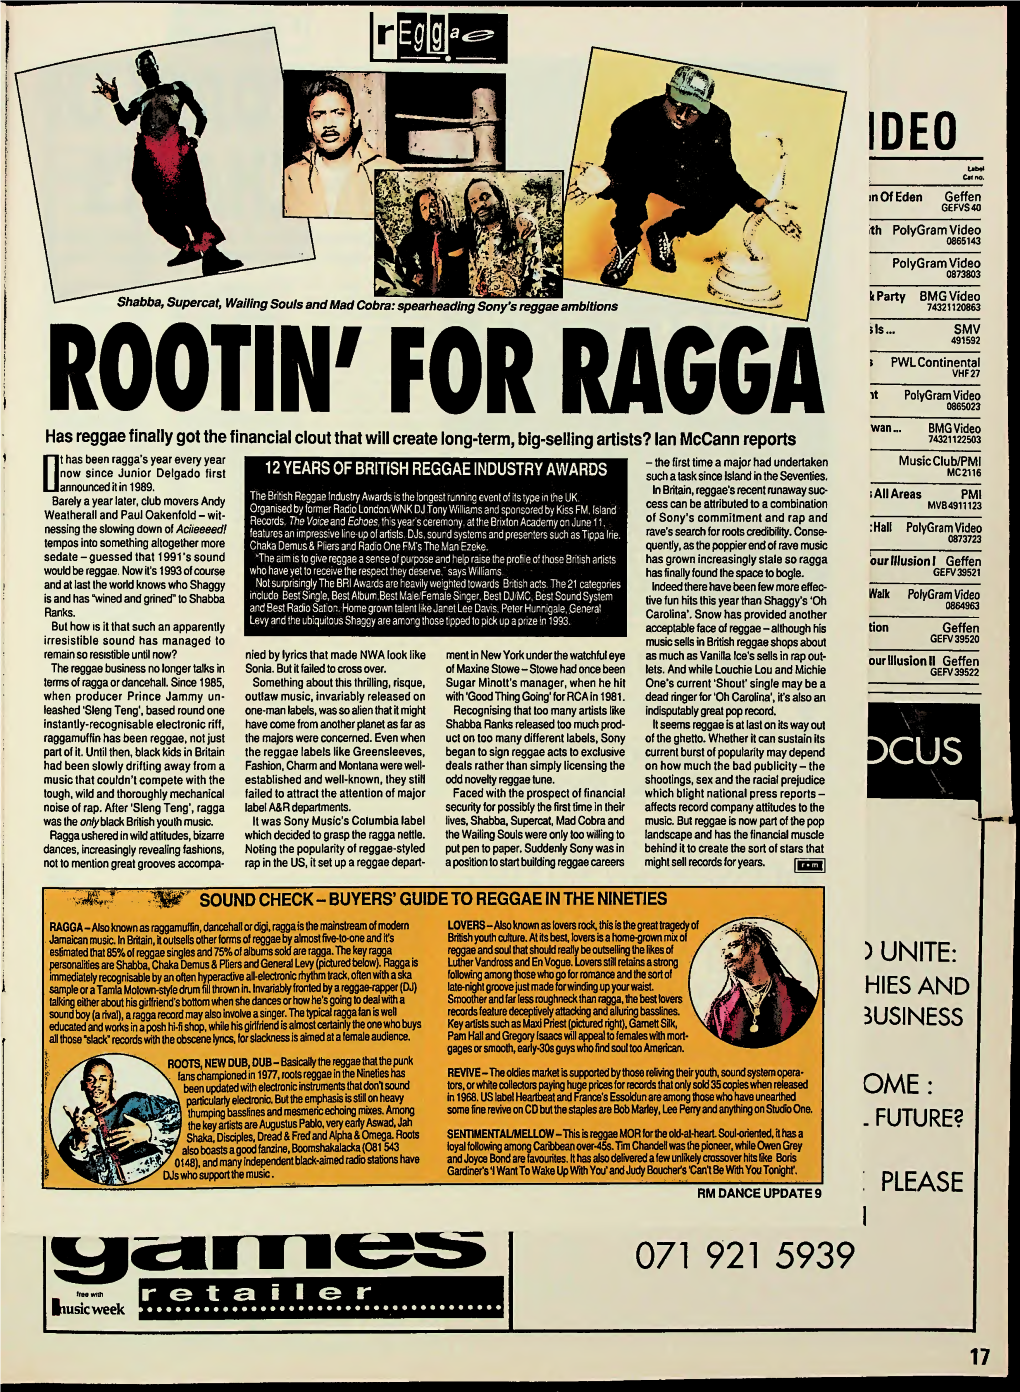 H IOOTIN' for 4GC« Has Reggae Finally Got the Financial Clout That Wili